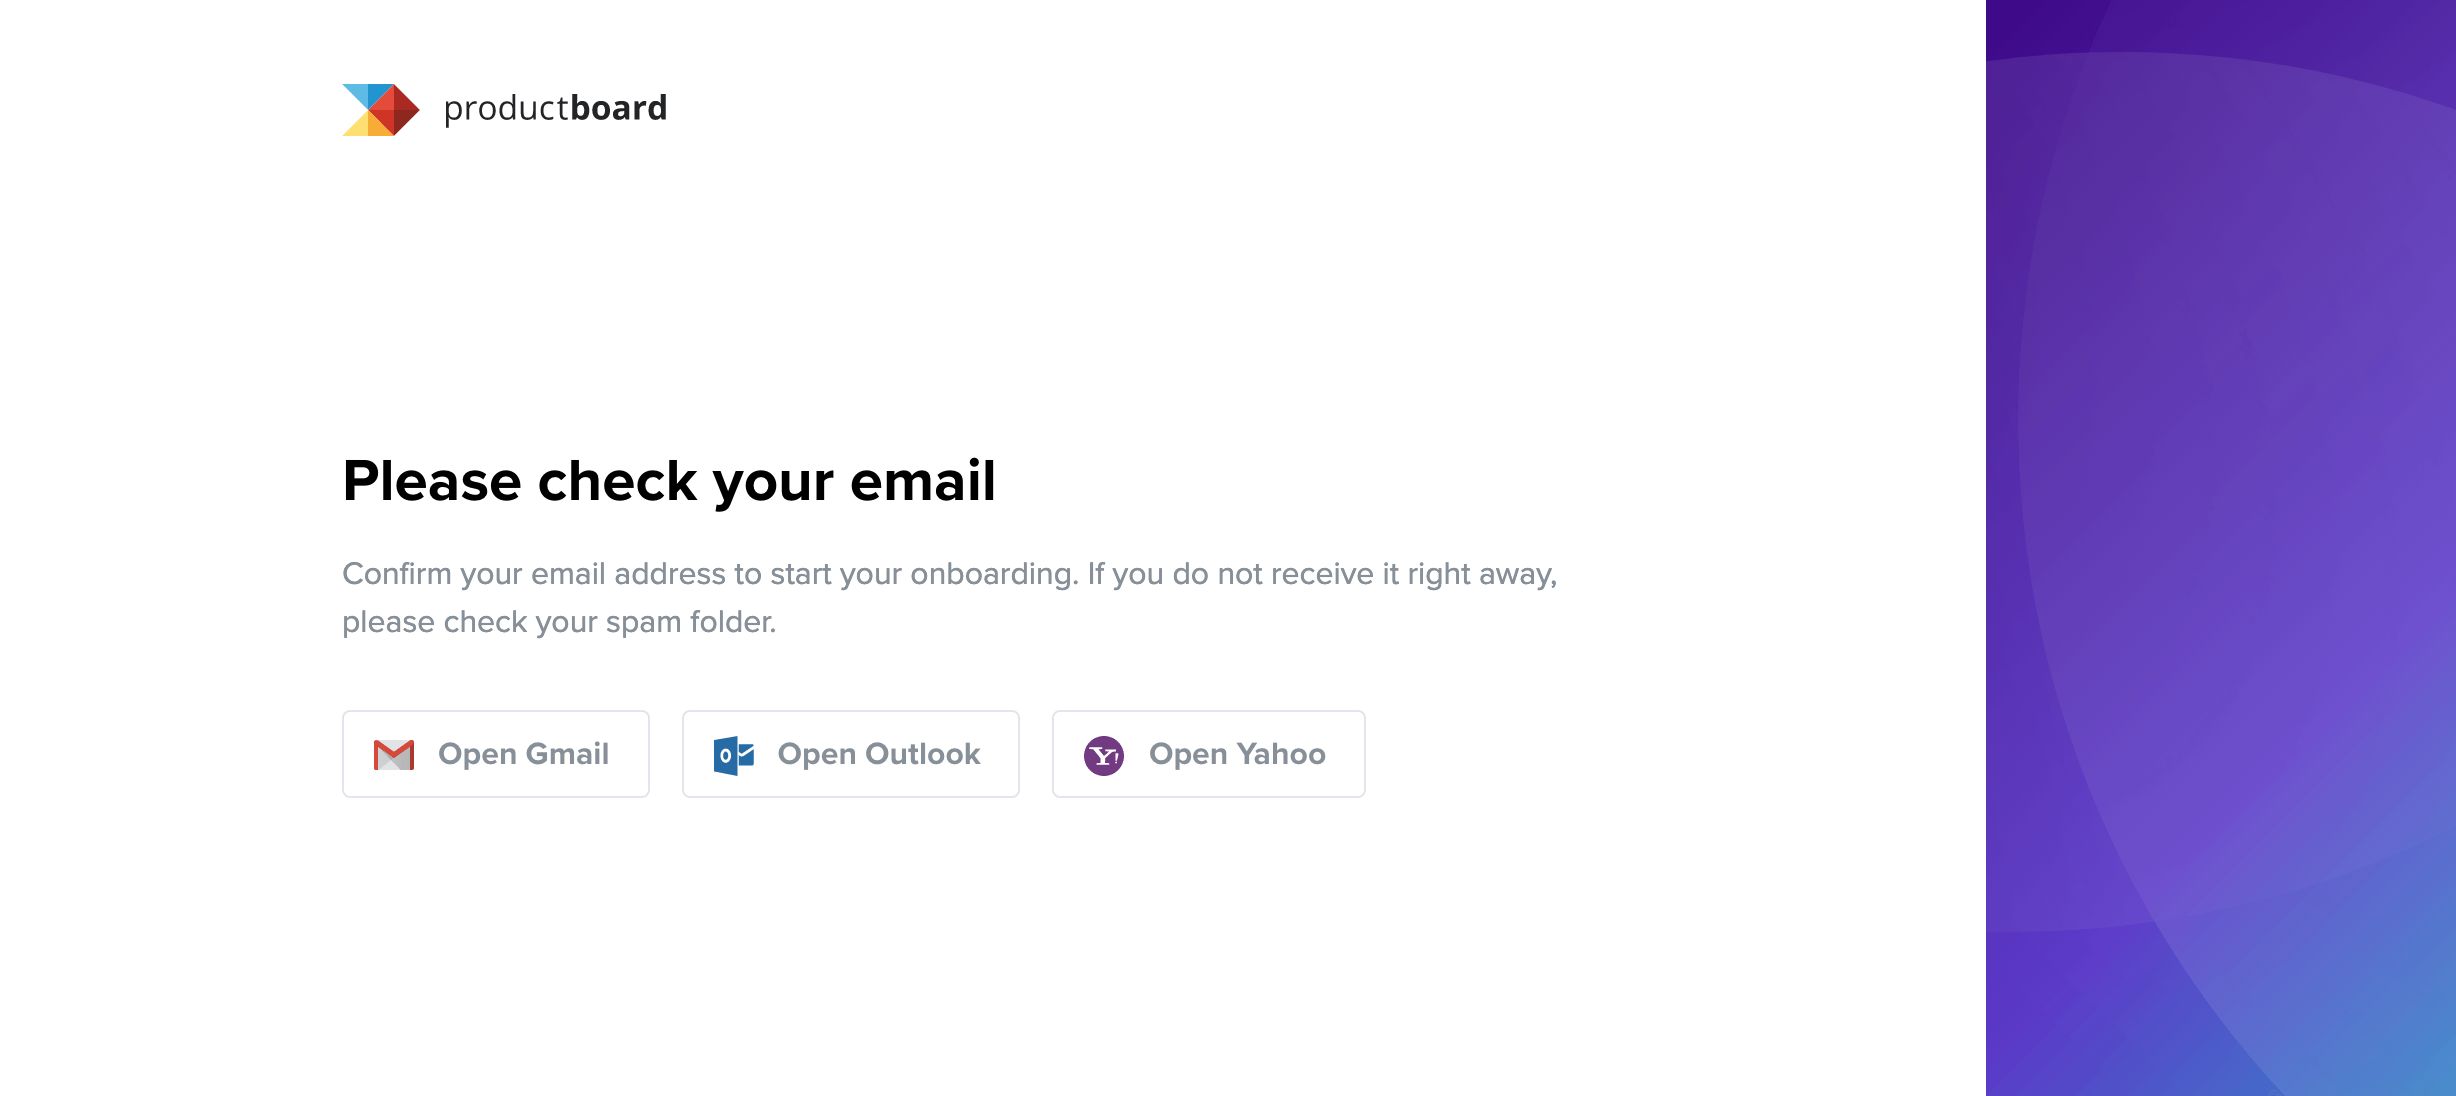 Productboard's email verification